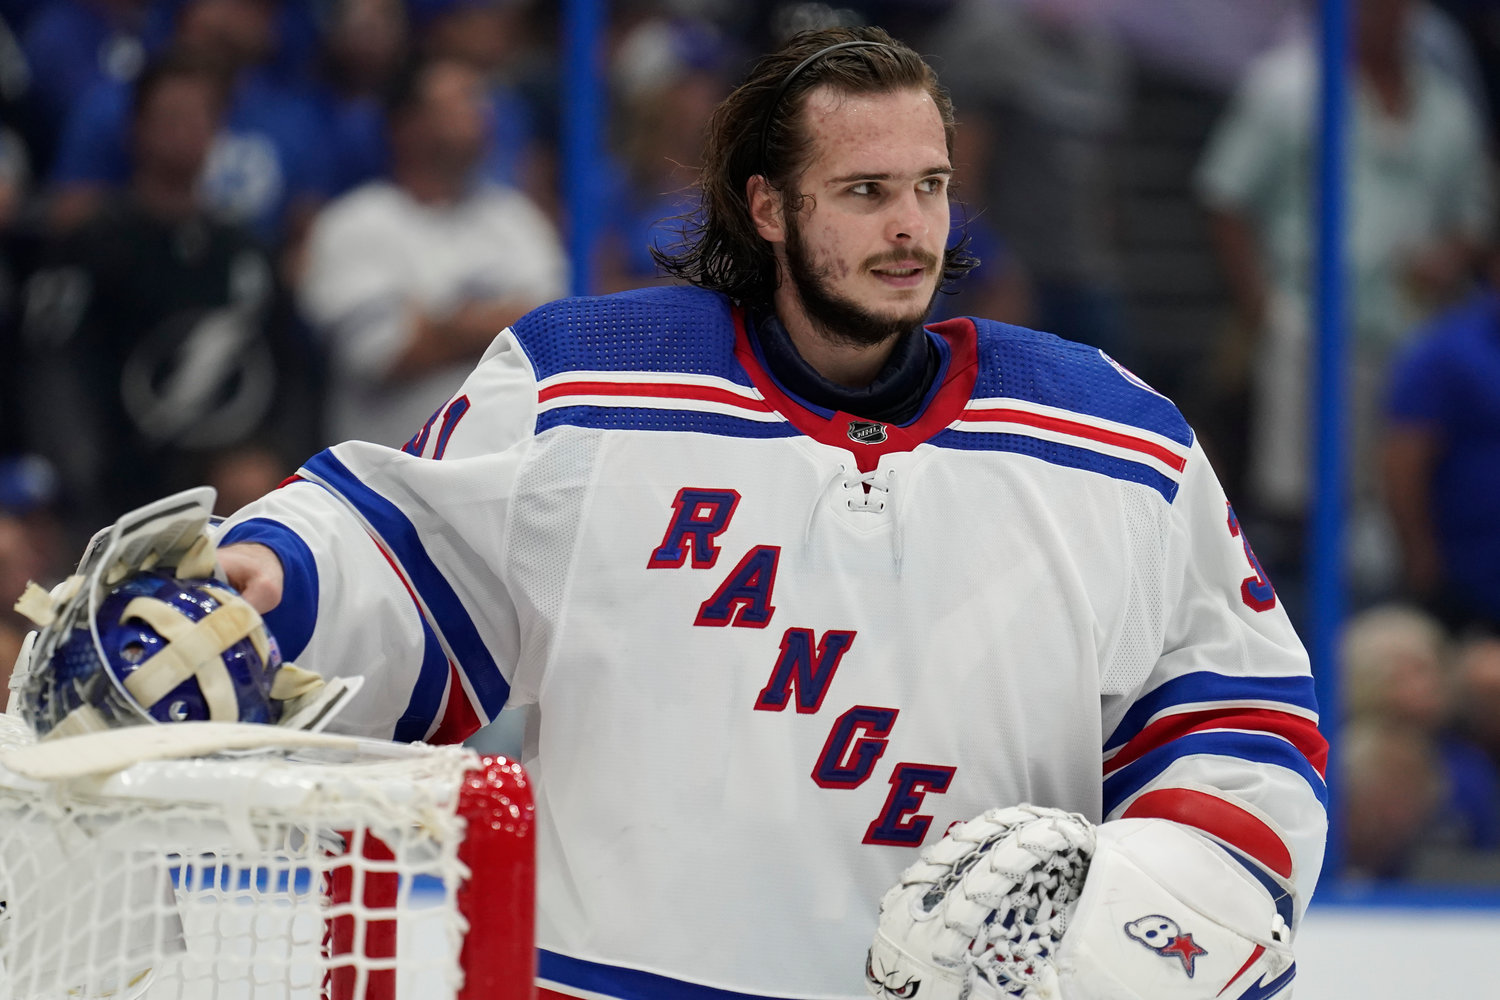 In this AP file photo, New York Rangers goaltender Igor Shesterkin is pictured in Game 3 of the NHL hockey Stanley Cup playoffs Eastern Conference finals against the Tampa Bay Lightning Sunday, June 5, 2022. Shesterkin recently claimed the Vezina Trophy as the league’s top goaltender.